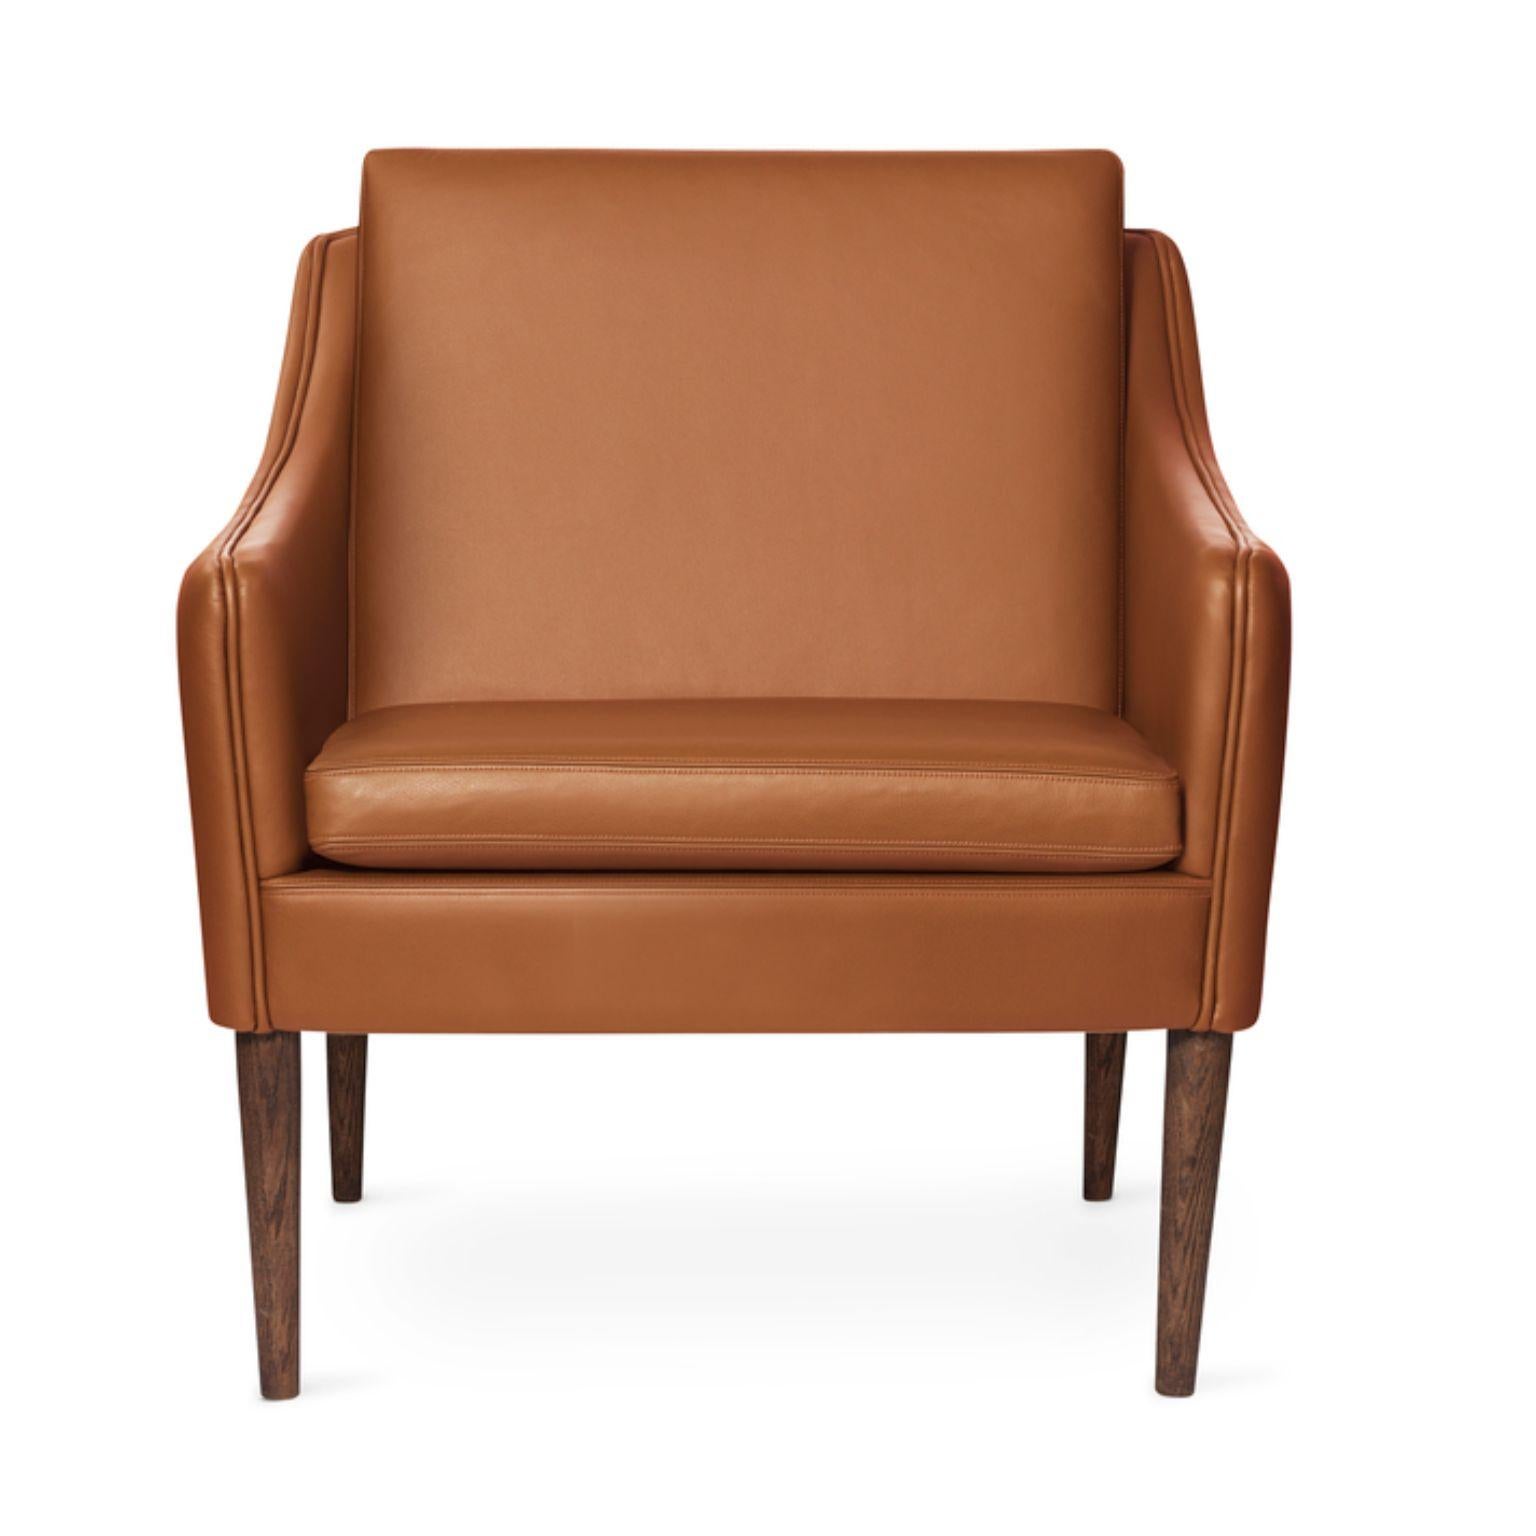 Mr. Olsen lounge chair silk solid smoked oak camel by Warm Nordic
Dimensions: D 81 x W79 x H 78 cm
Material: Textile upholstery, foam, spring system, oak, silk
Weight: 27 kg
Also available in different colours, materials and finishes.

A